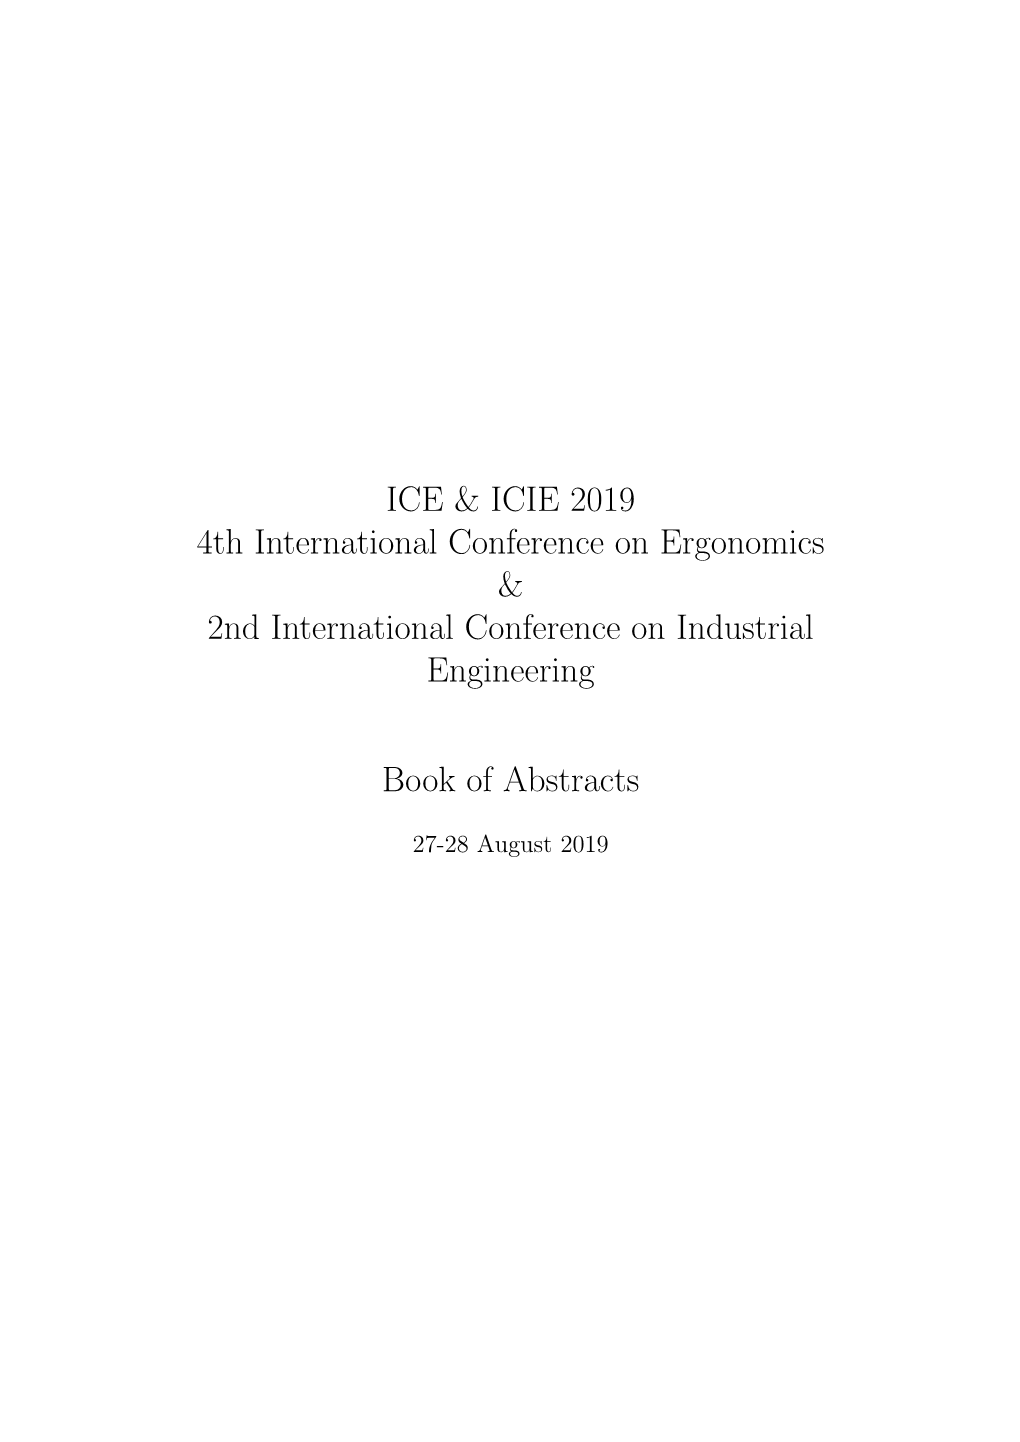 ICE & ICIE 2019 Book of Abstracts